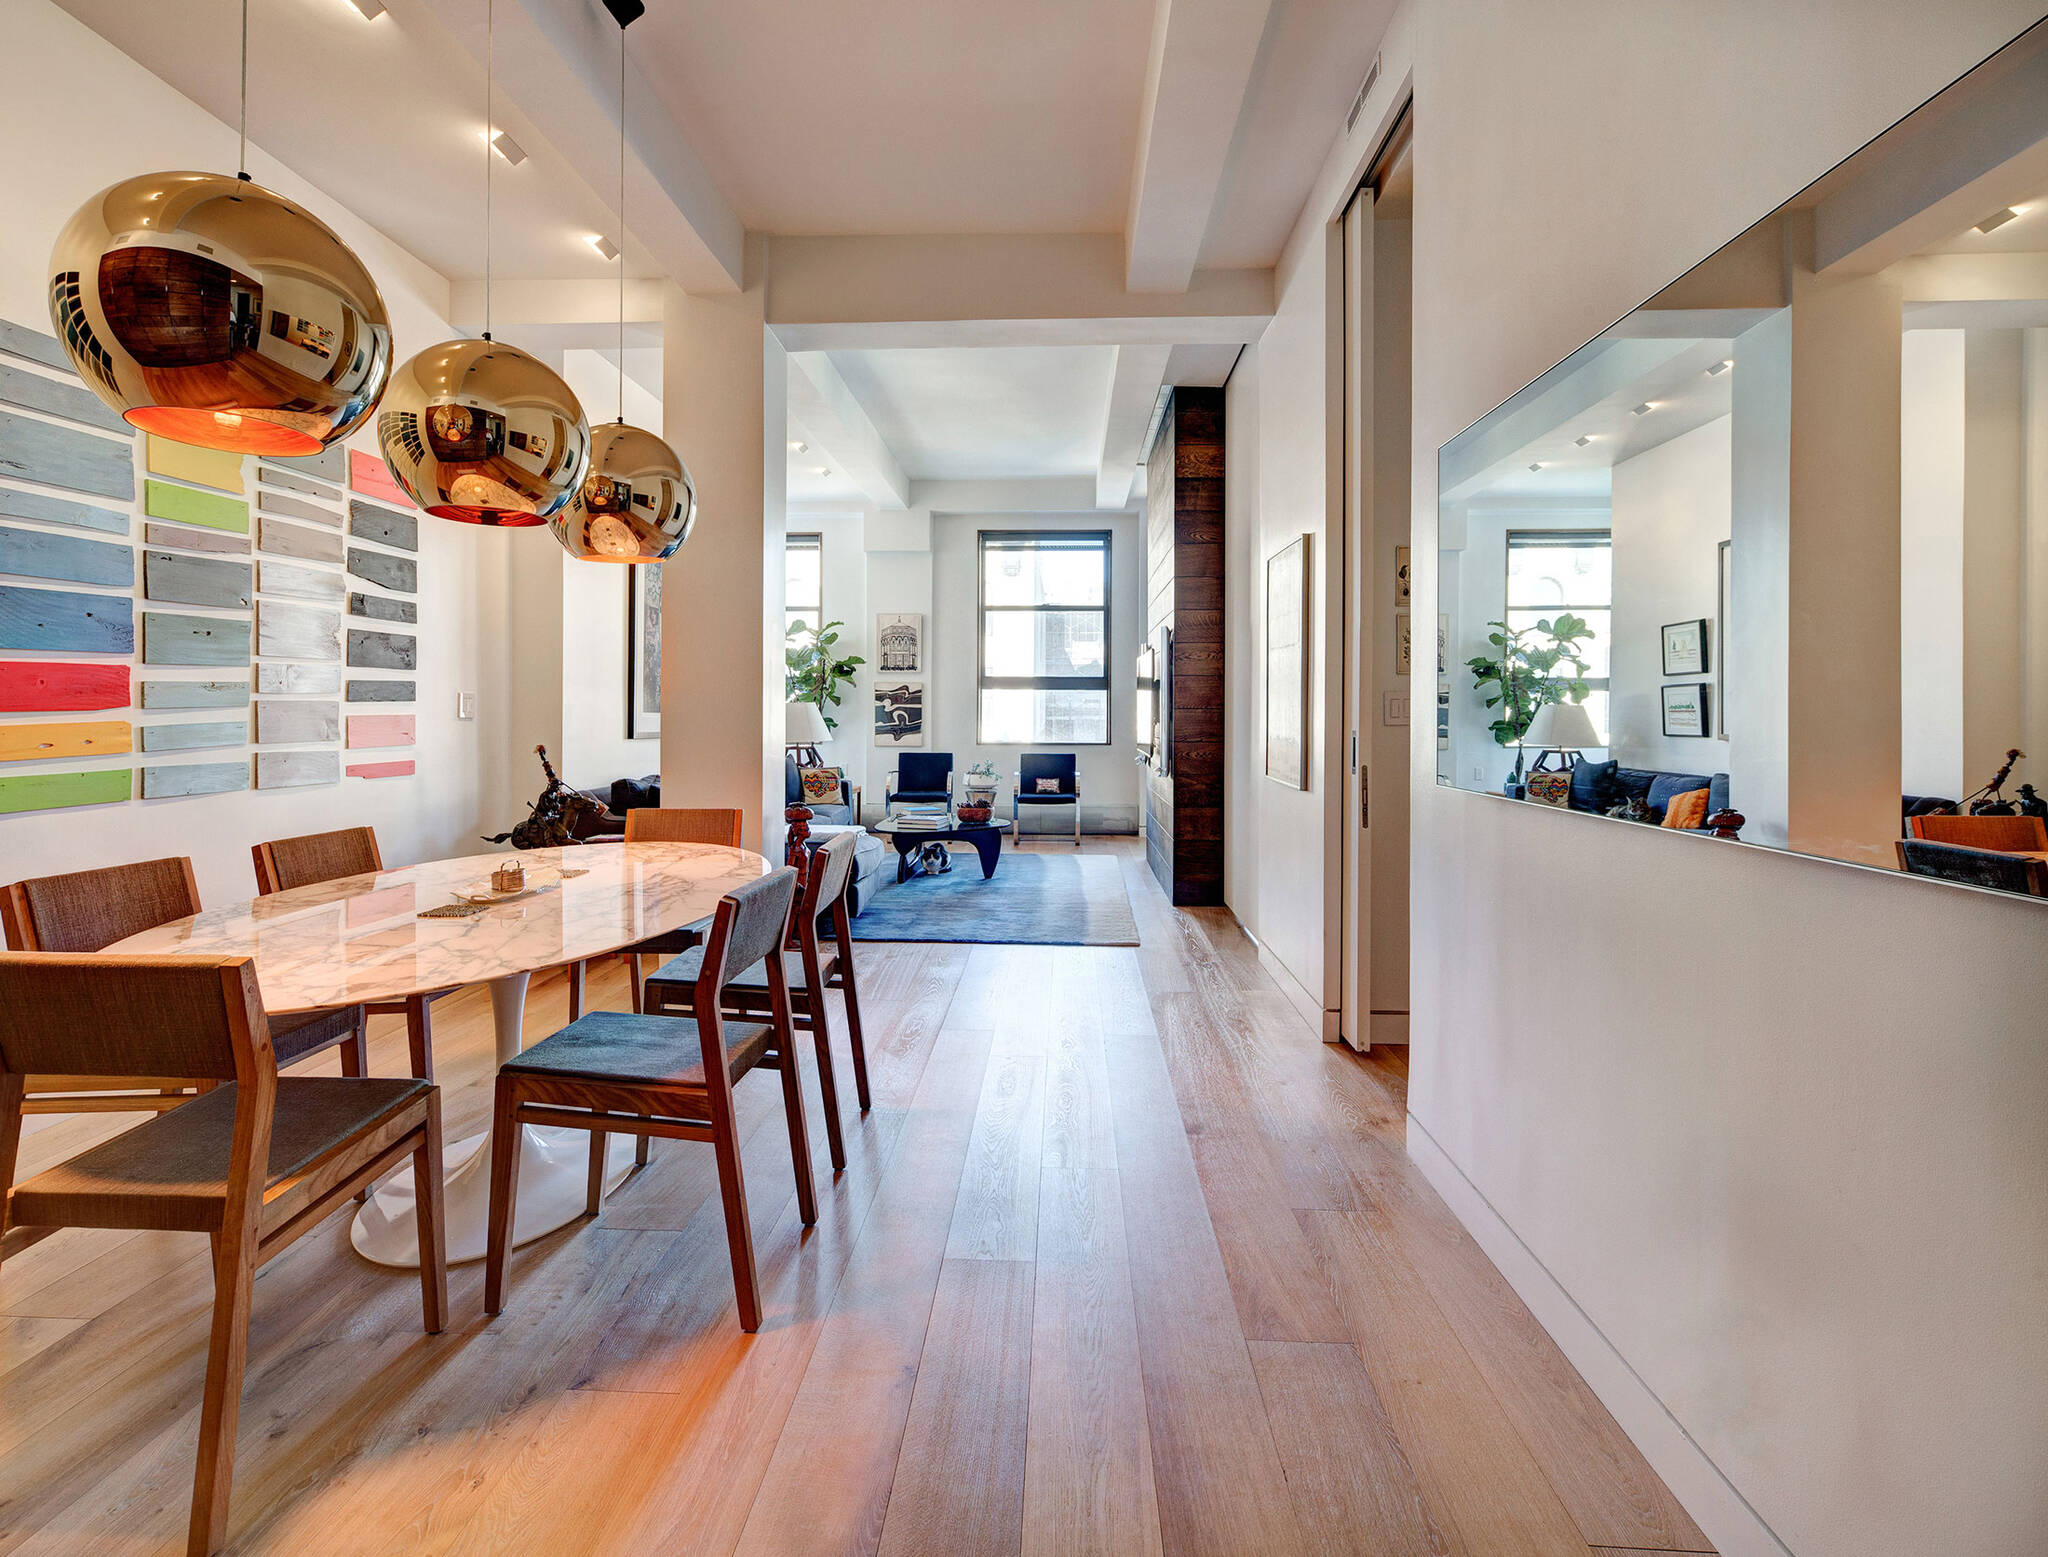 View of the dining room and living room from the entrance of the residence renovation project in the Chelsea Mews building on the Flatiron District in Manhattan, New York City designed by the architecture studio Danny Forster & Architecture